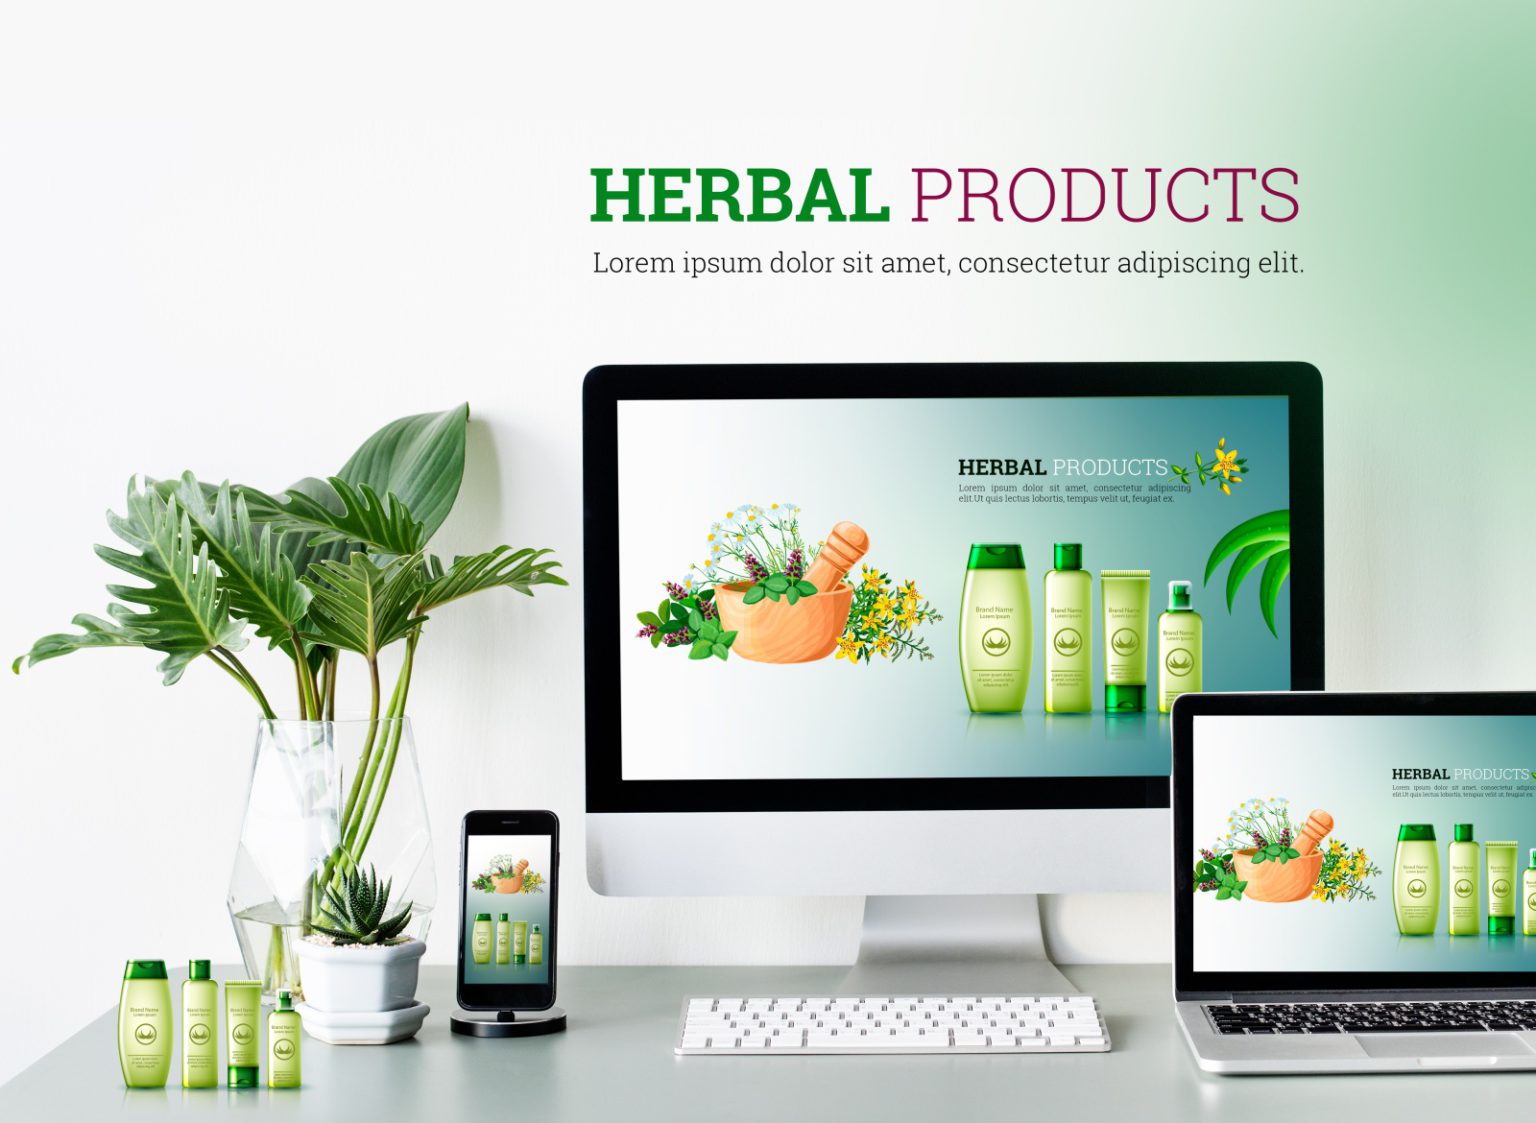 herbal beauty products business plan